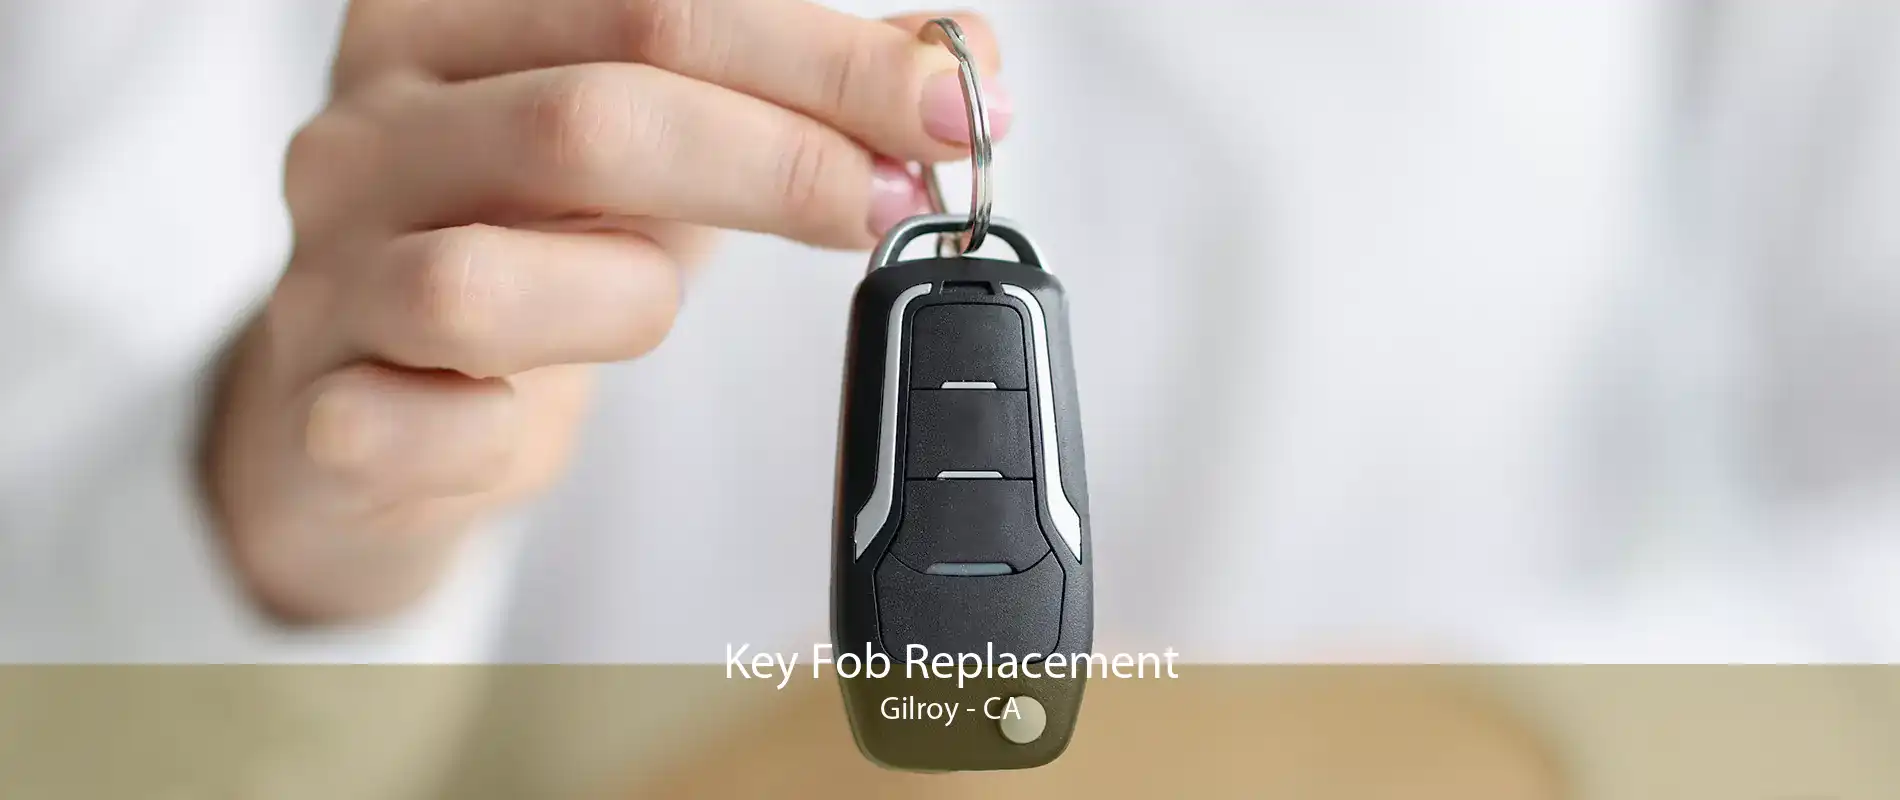 Key Fob Replacement Gilroy - CA